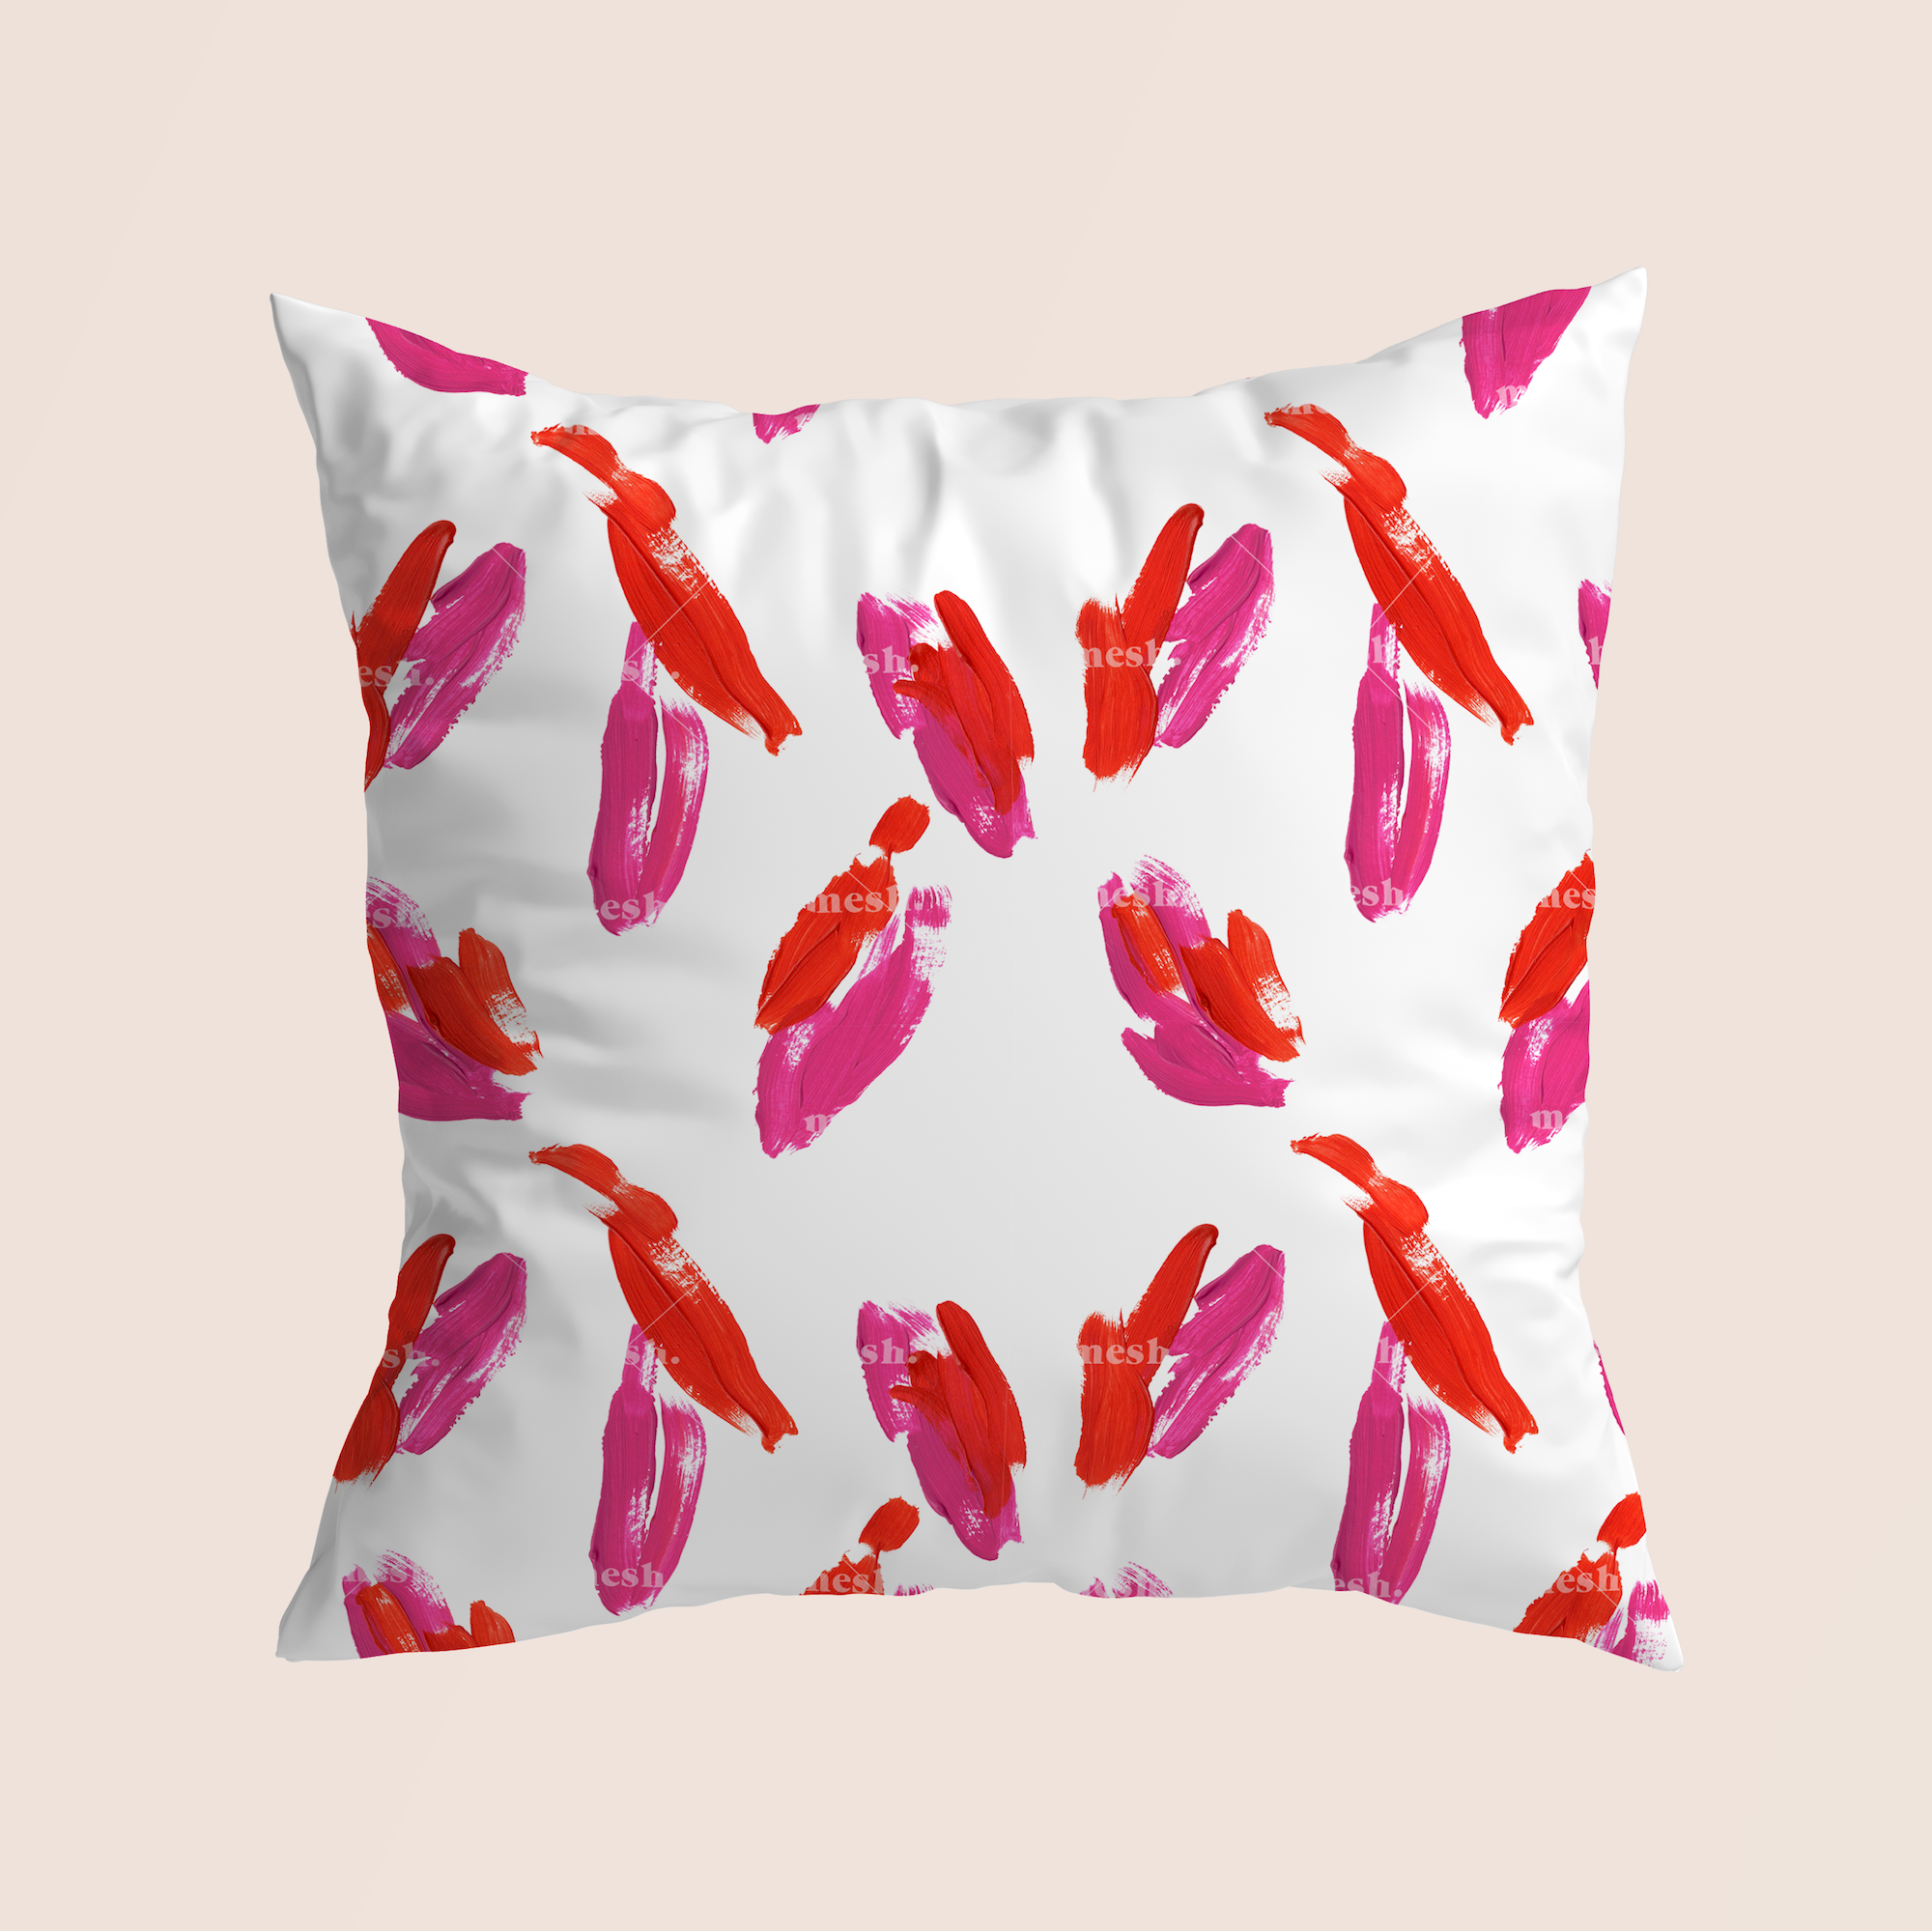 Paint brush strokes red and pink in white pattern design printed on recycled fabric pillow mockup